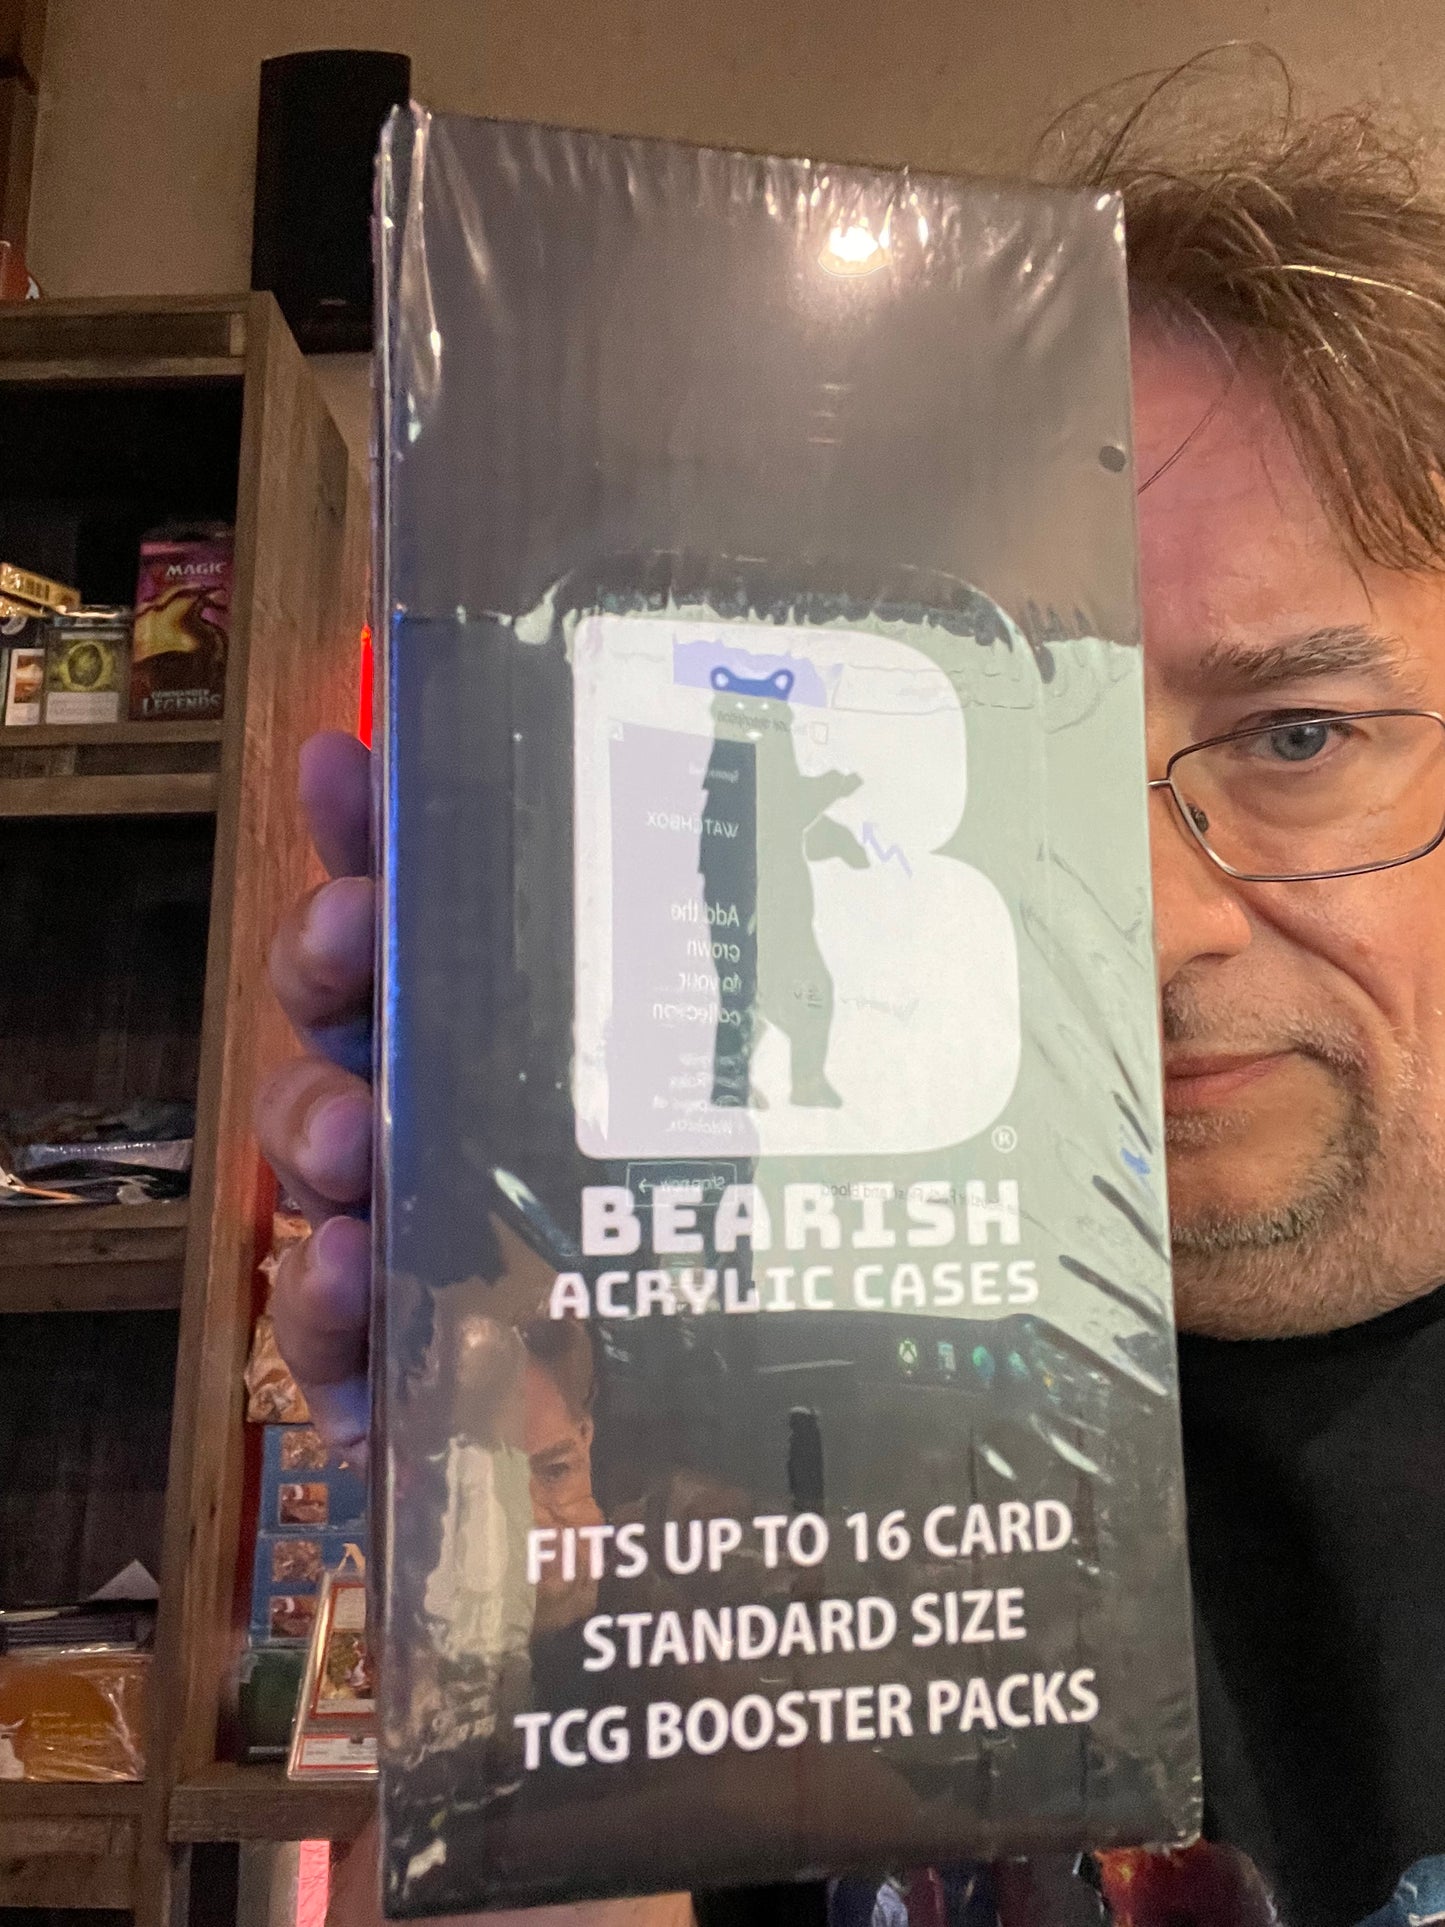 12 Bearish Acrylic Cases! Holds 16 card booster packs!